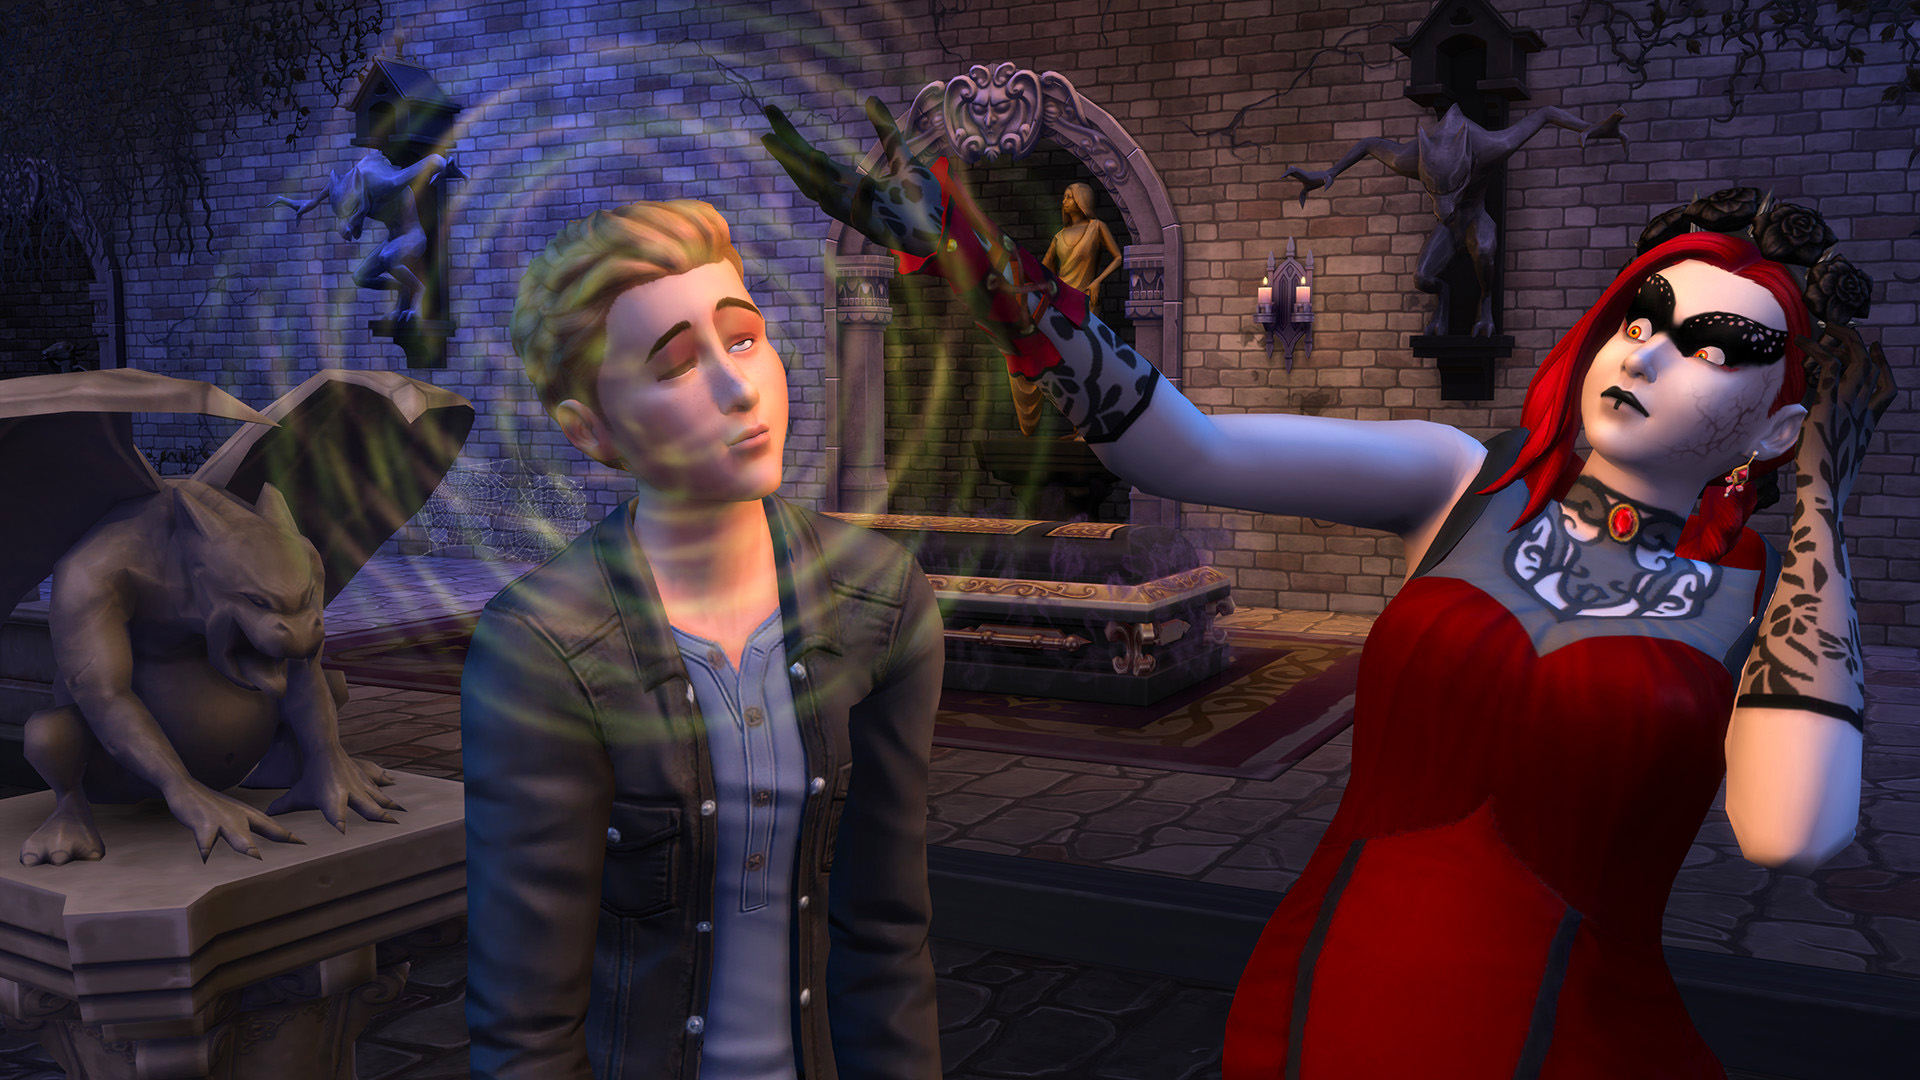 A sim gets bewitched by a goth girl in Vampire game The Sims 4 Vampires expansion